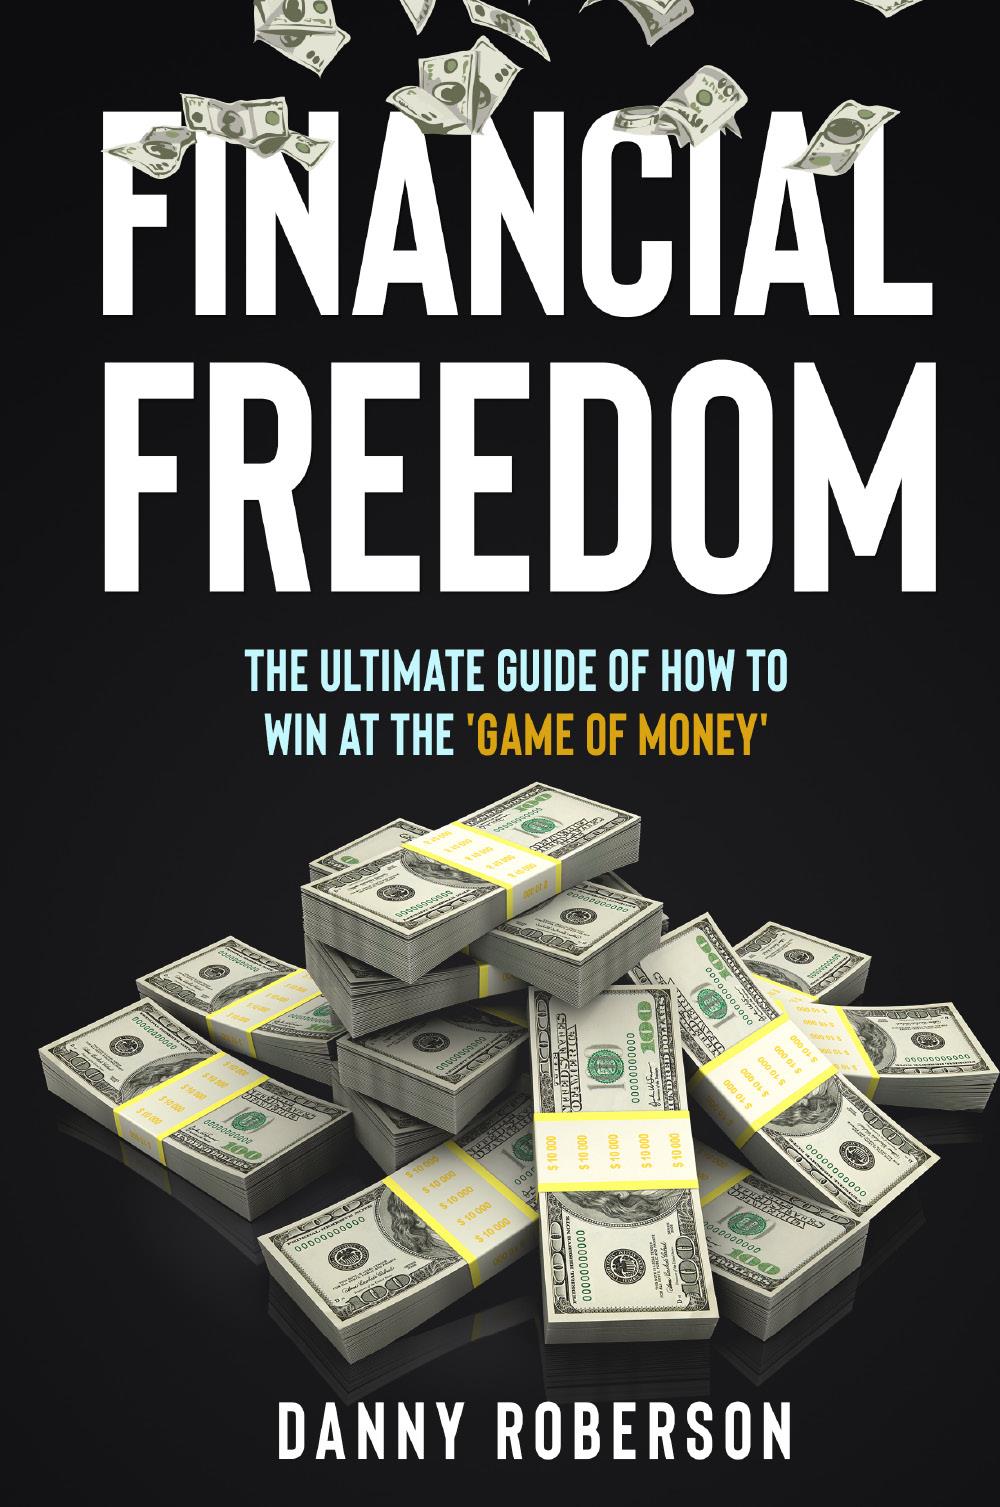 FINANCIAL FREEDOM. The Ultimate Guide of How to Win at the 'Game of Money'